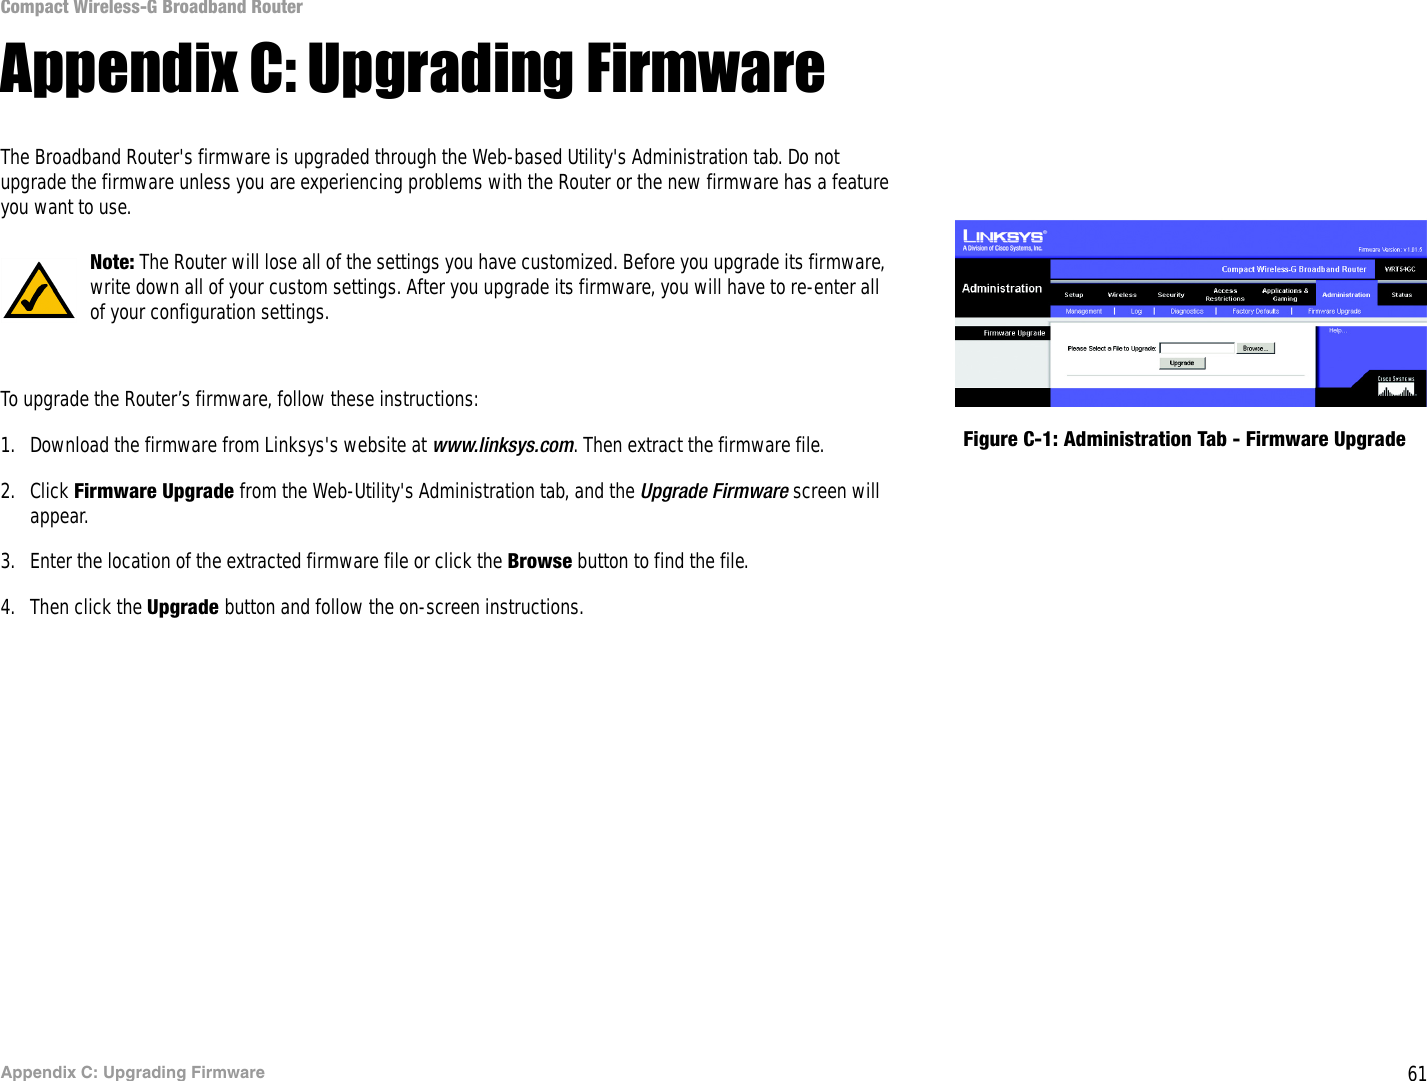 61Appendix C: Upgrading FirmwareCompact Wireless-G Broadband RouterAppendix C: Upgrading FirmwareThe Broadband Router&apos;s firmware is upgraded through the Web-based Utility&apos;s Administration tab. Do not upgrade the firmware unless you are experiencing problems with the Router or the new firmware has a feature you want to use.To upgrade the Router’s firmware, follow these instructions:1. Download the firmware from Linksys&apos;s website at www.linksys.com. Then extract the firmware file.2. Click Firmware Upgrade from the Web-Utility&apos;s Administration tab, and the Upgrade Firmware screen will appear.3. Enter the location of the extracted firmware file or click the Browse button to find the file.4. Then click the Upgrade button and follow the on-screen instructions.Figure C-1: Administration Tab - Firmware UpgradeNote: The Router will lose all of the settings you have customized. Before you upgrade its firmware, write down all of your custom settings. After you upgrade its firmware, you will have to re-enter all of your configuration settings.